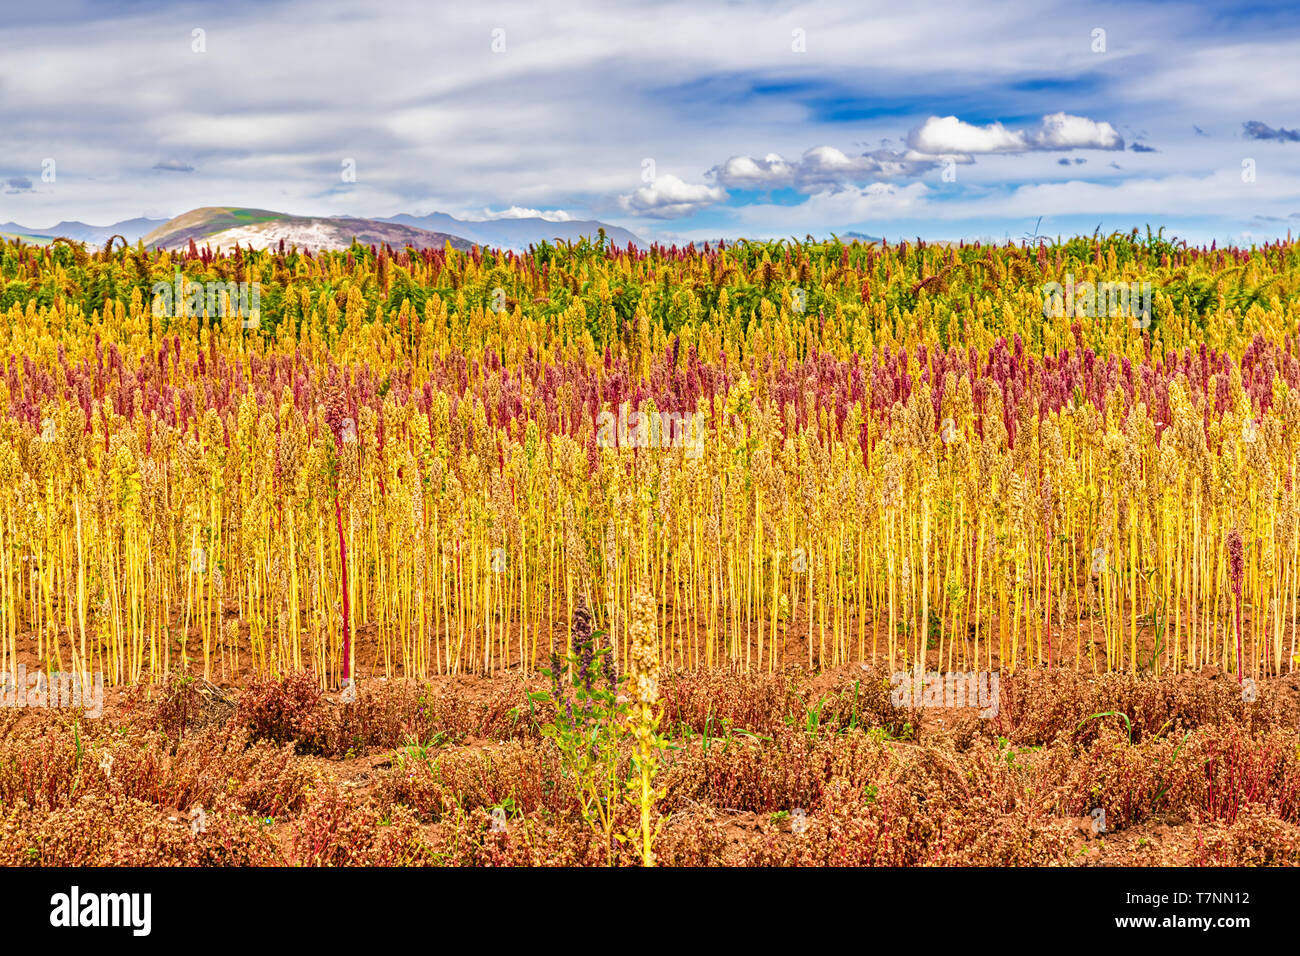 Red and yellow quinoa field in the Andean highlands of Peru near Cusco by Maras Morea the old Incas agricultural fields. Stock Photo